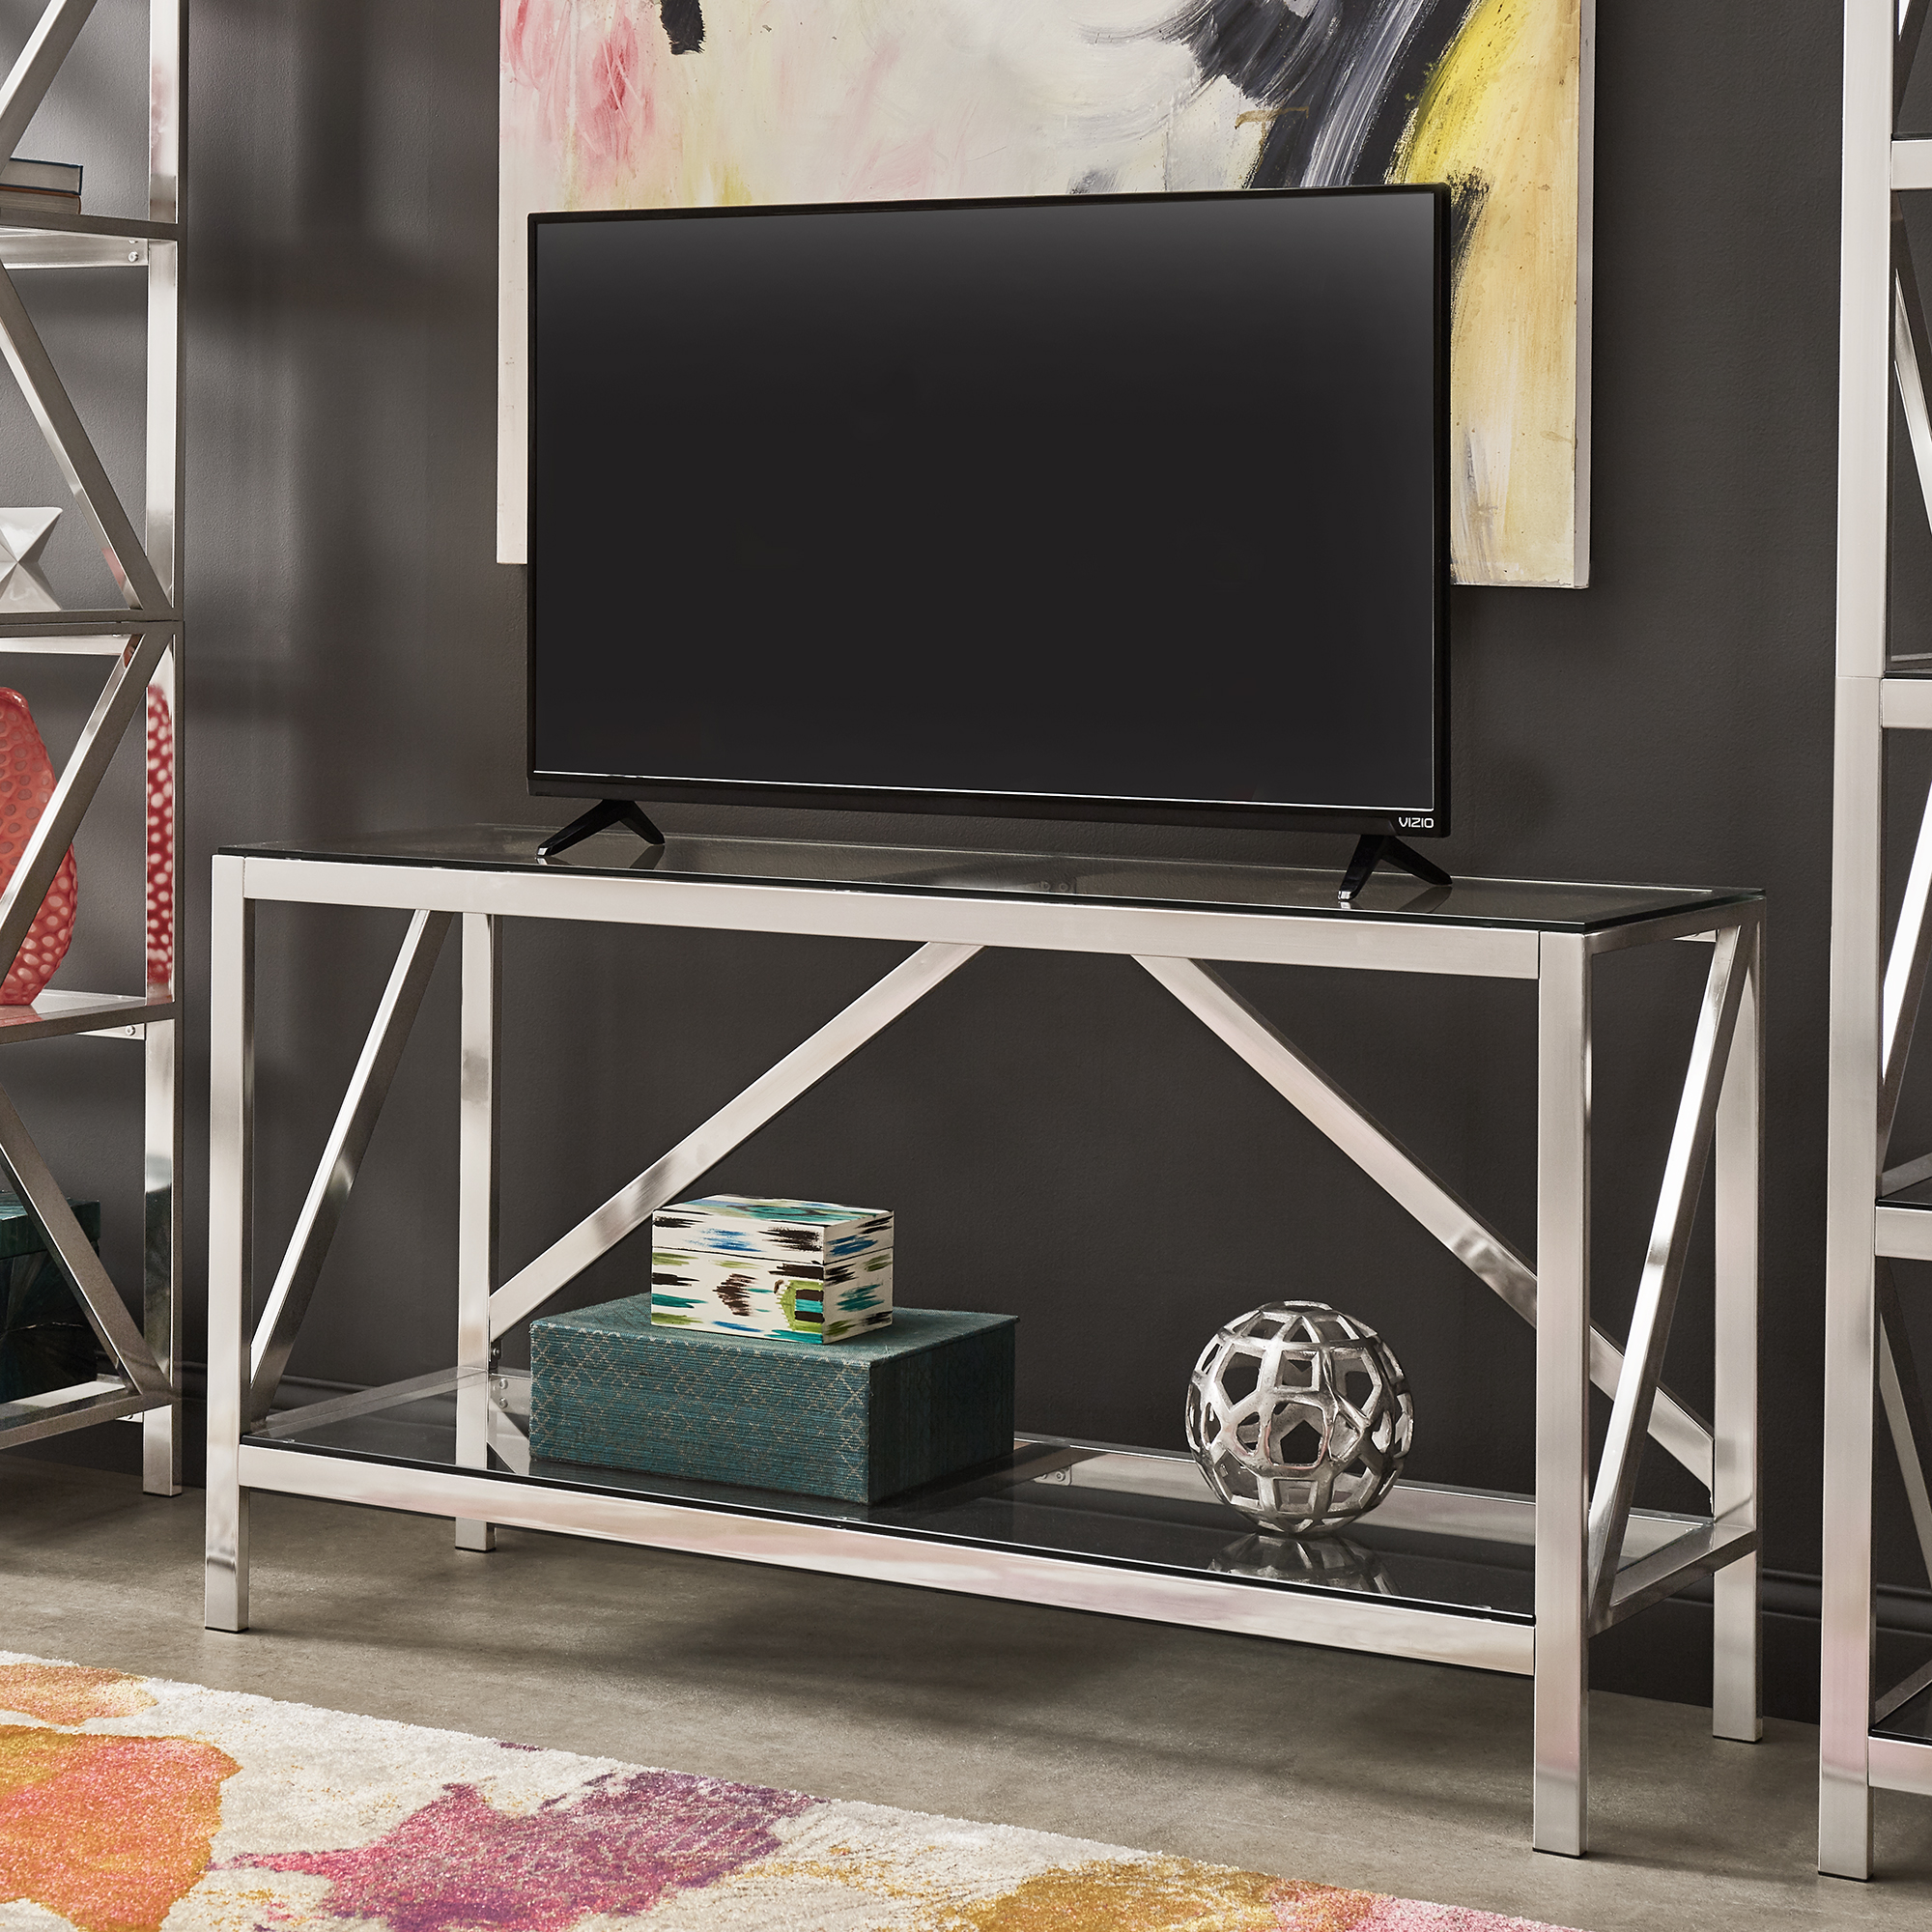 This is the Brushed Nickel TV Stand by iNSPIRE Q Bold. It is depicted as a TV stand, with a TV perched on top while the lower glass shelf displays a few pieces of décor.